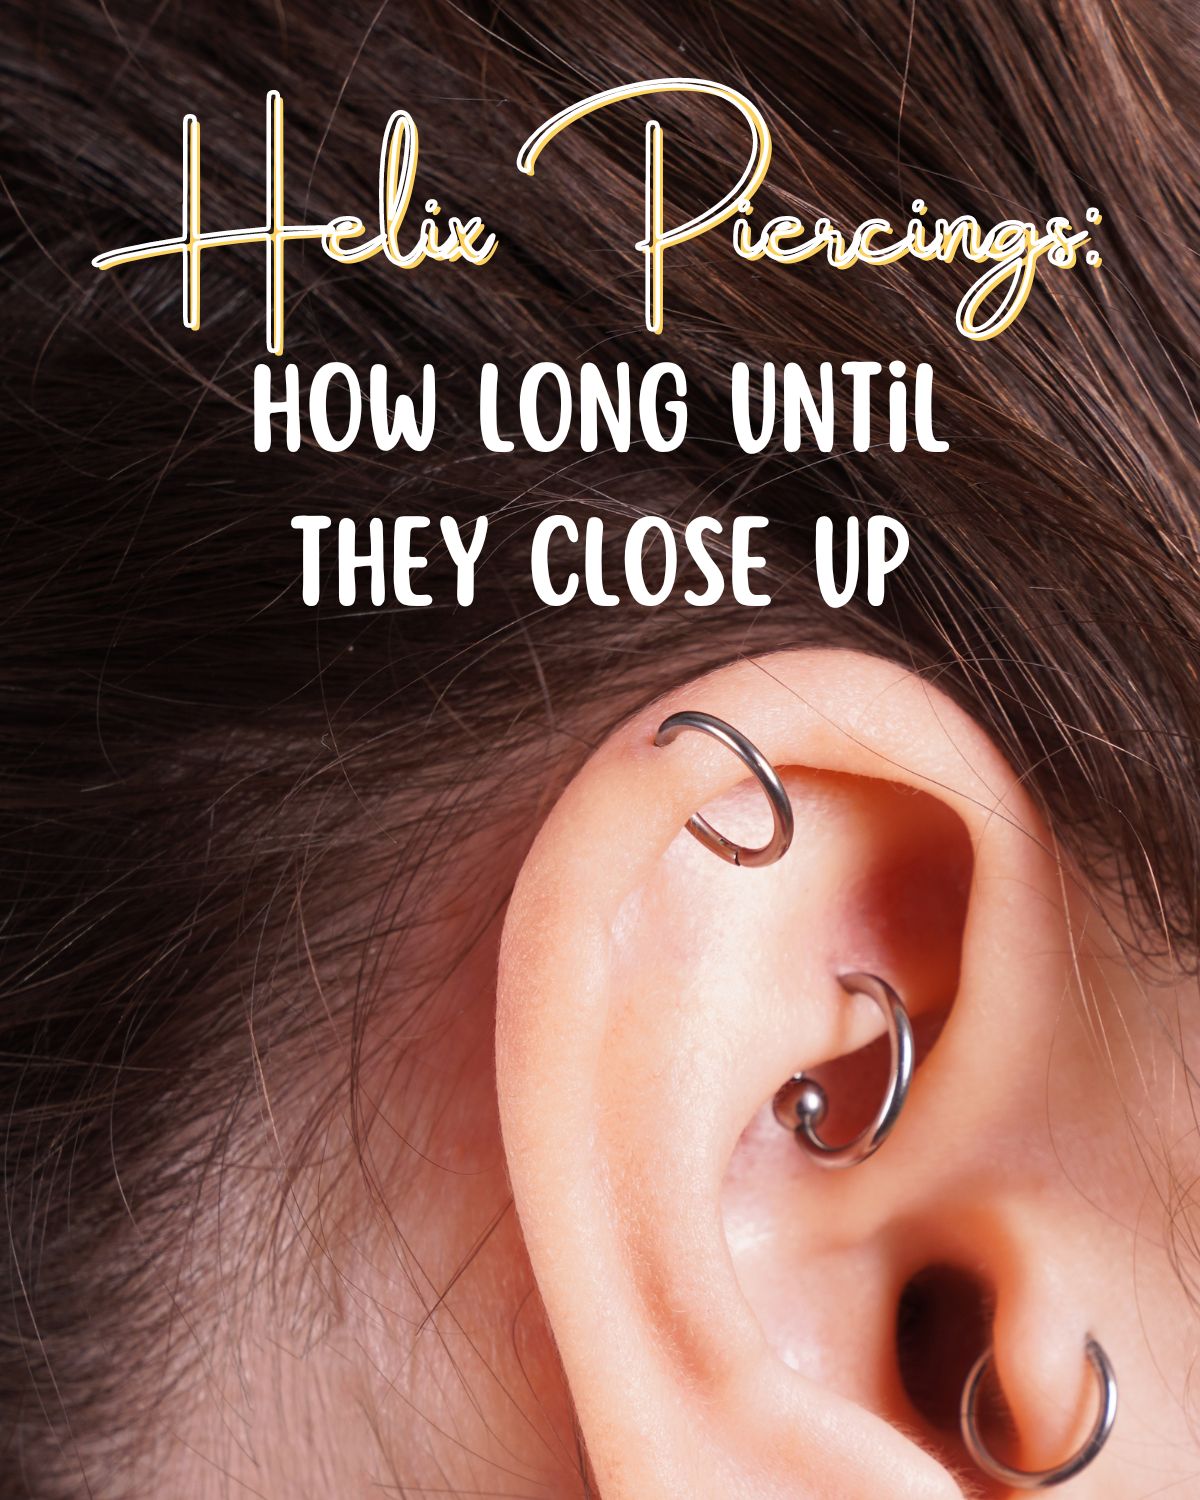 A woman with multiple hoop earrings in different piercings in her tragus and helix before the hole closes